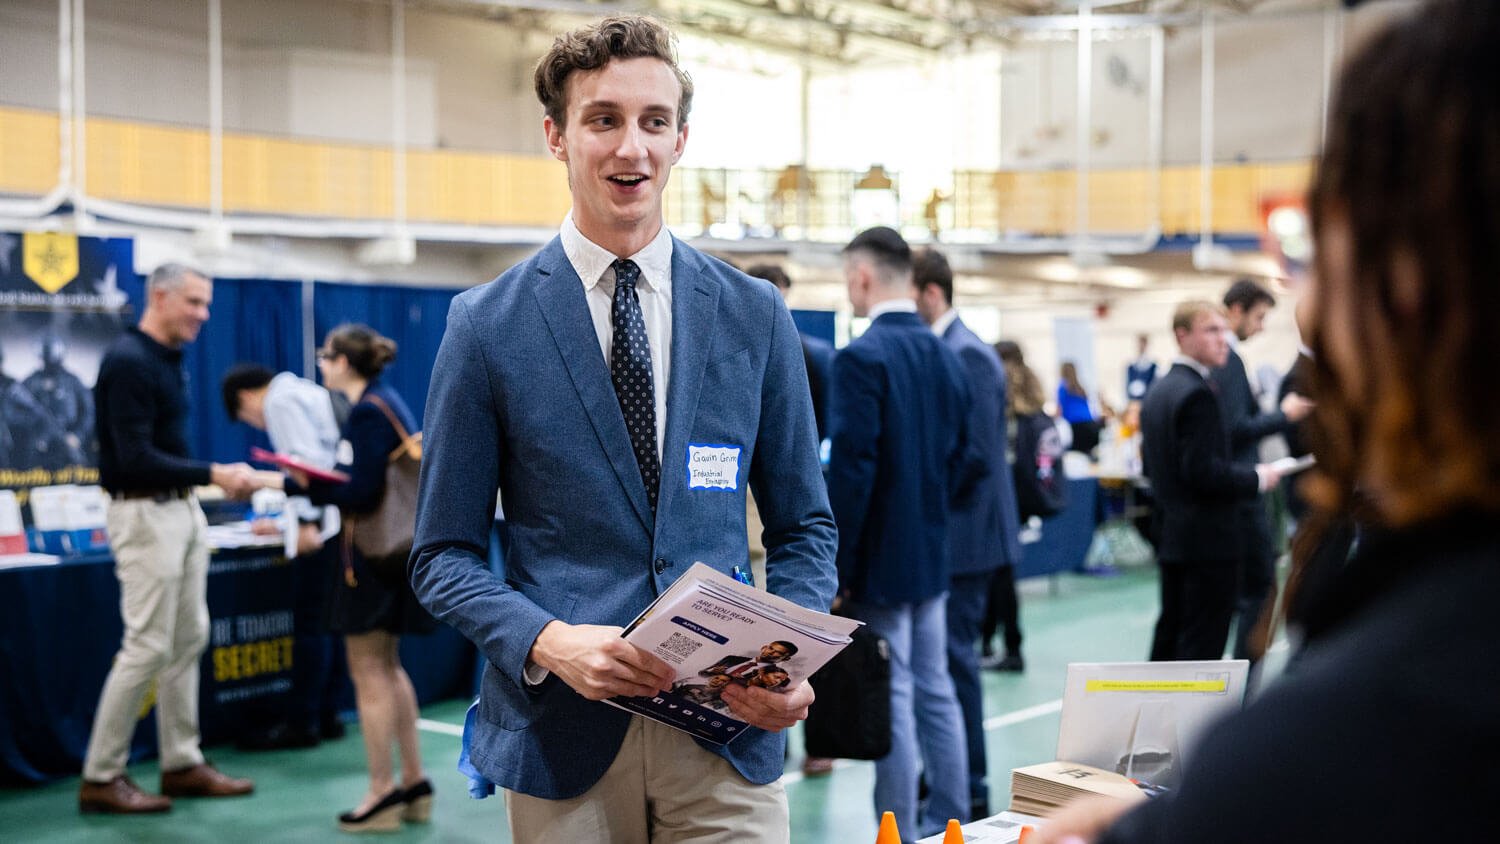 A student interacts with a brand representative during the University career fair.